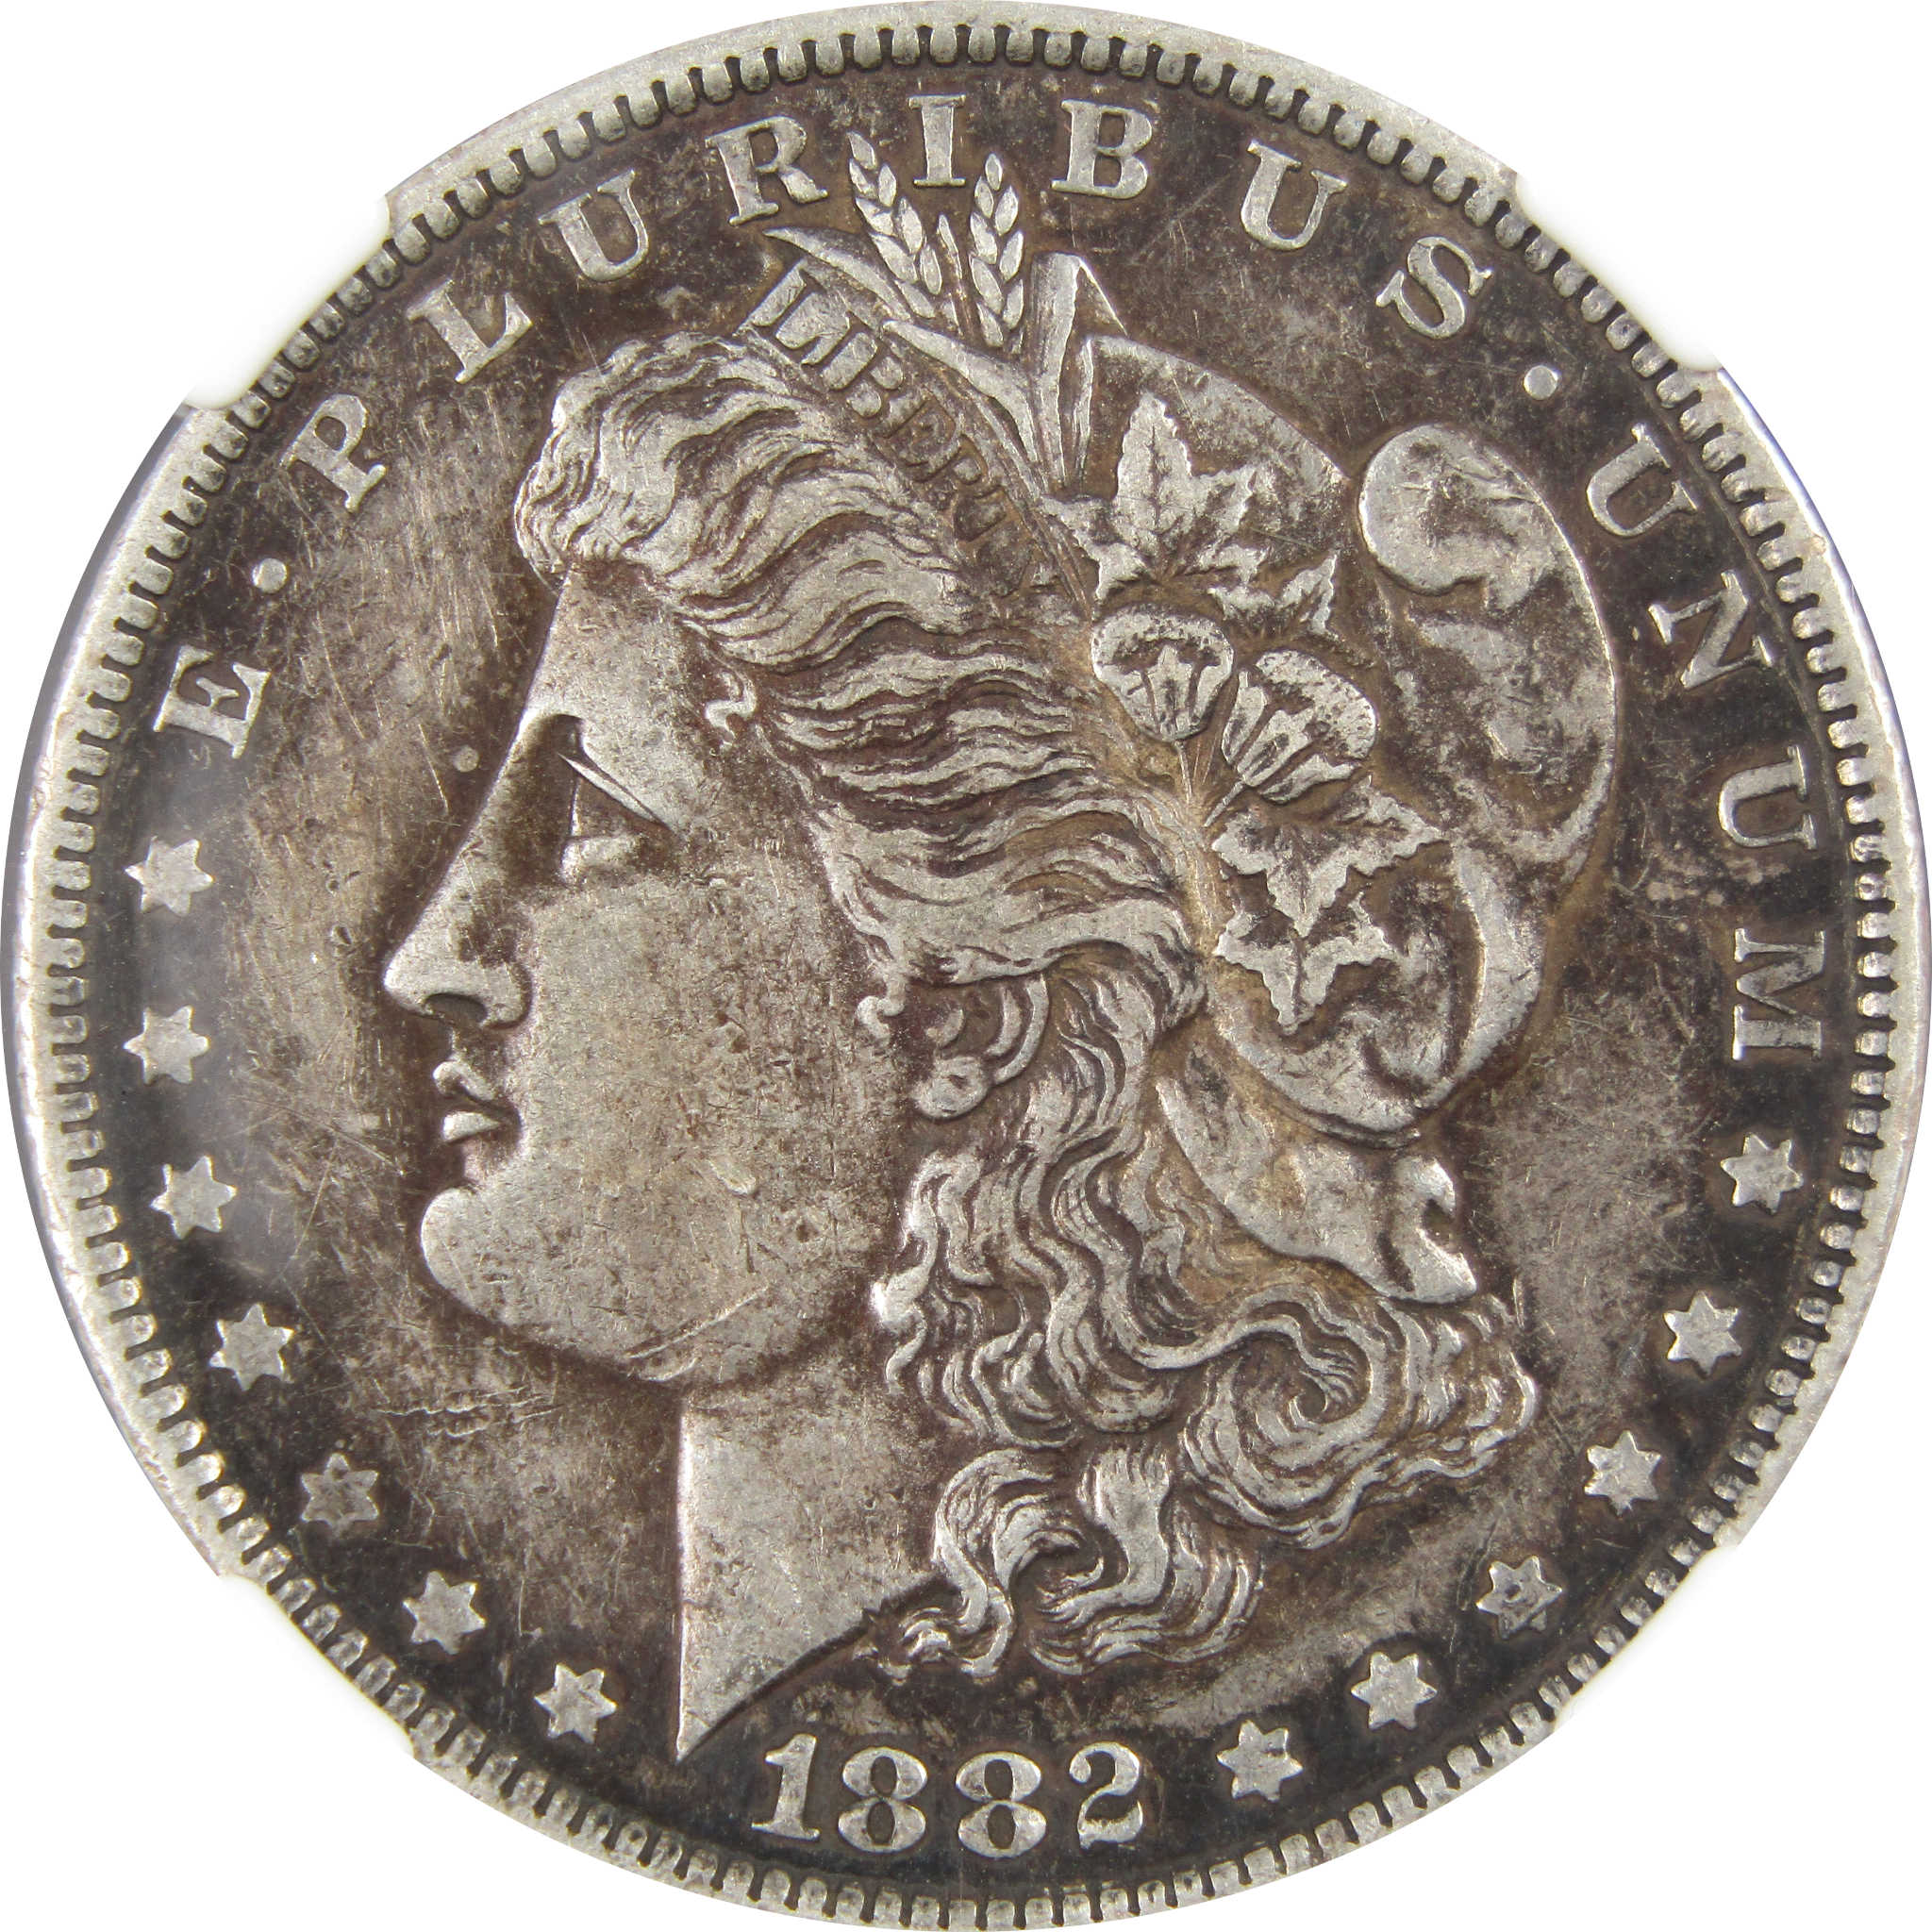 1882 O/S VAM-4 Recessed S EDS Top 100 Morgan Dollar XF45 NGC SKU:I7788 - Morgan coin - Morgan silver dollar - Morgan silver dollar for sale - Profile Coins &amp; Collectibles